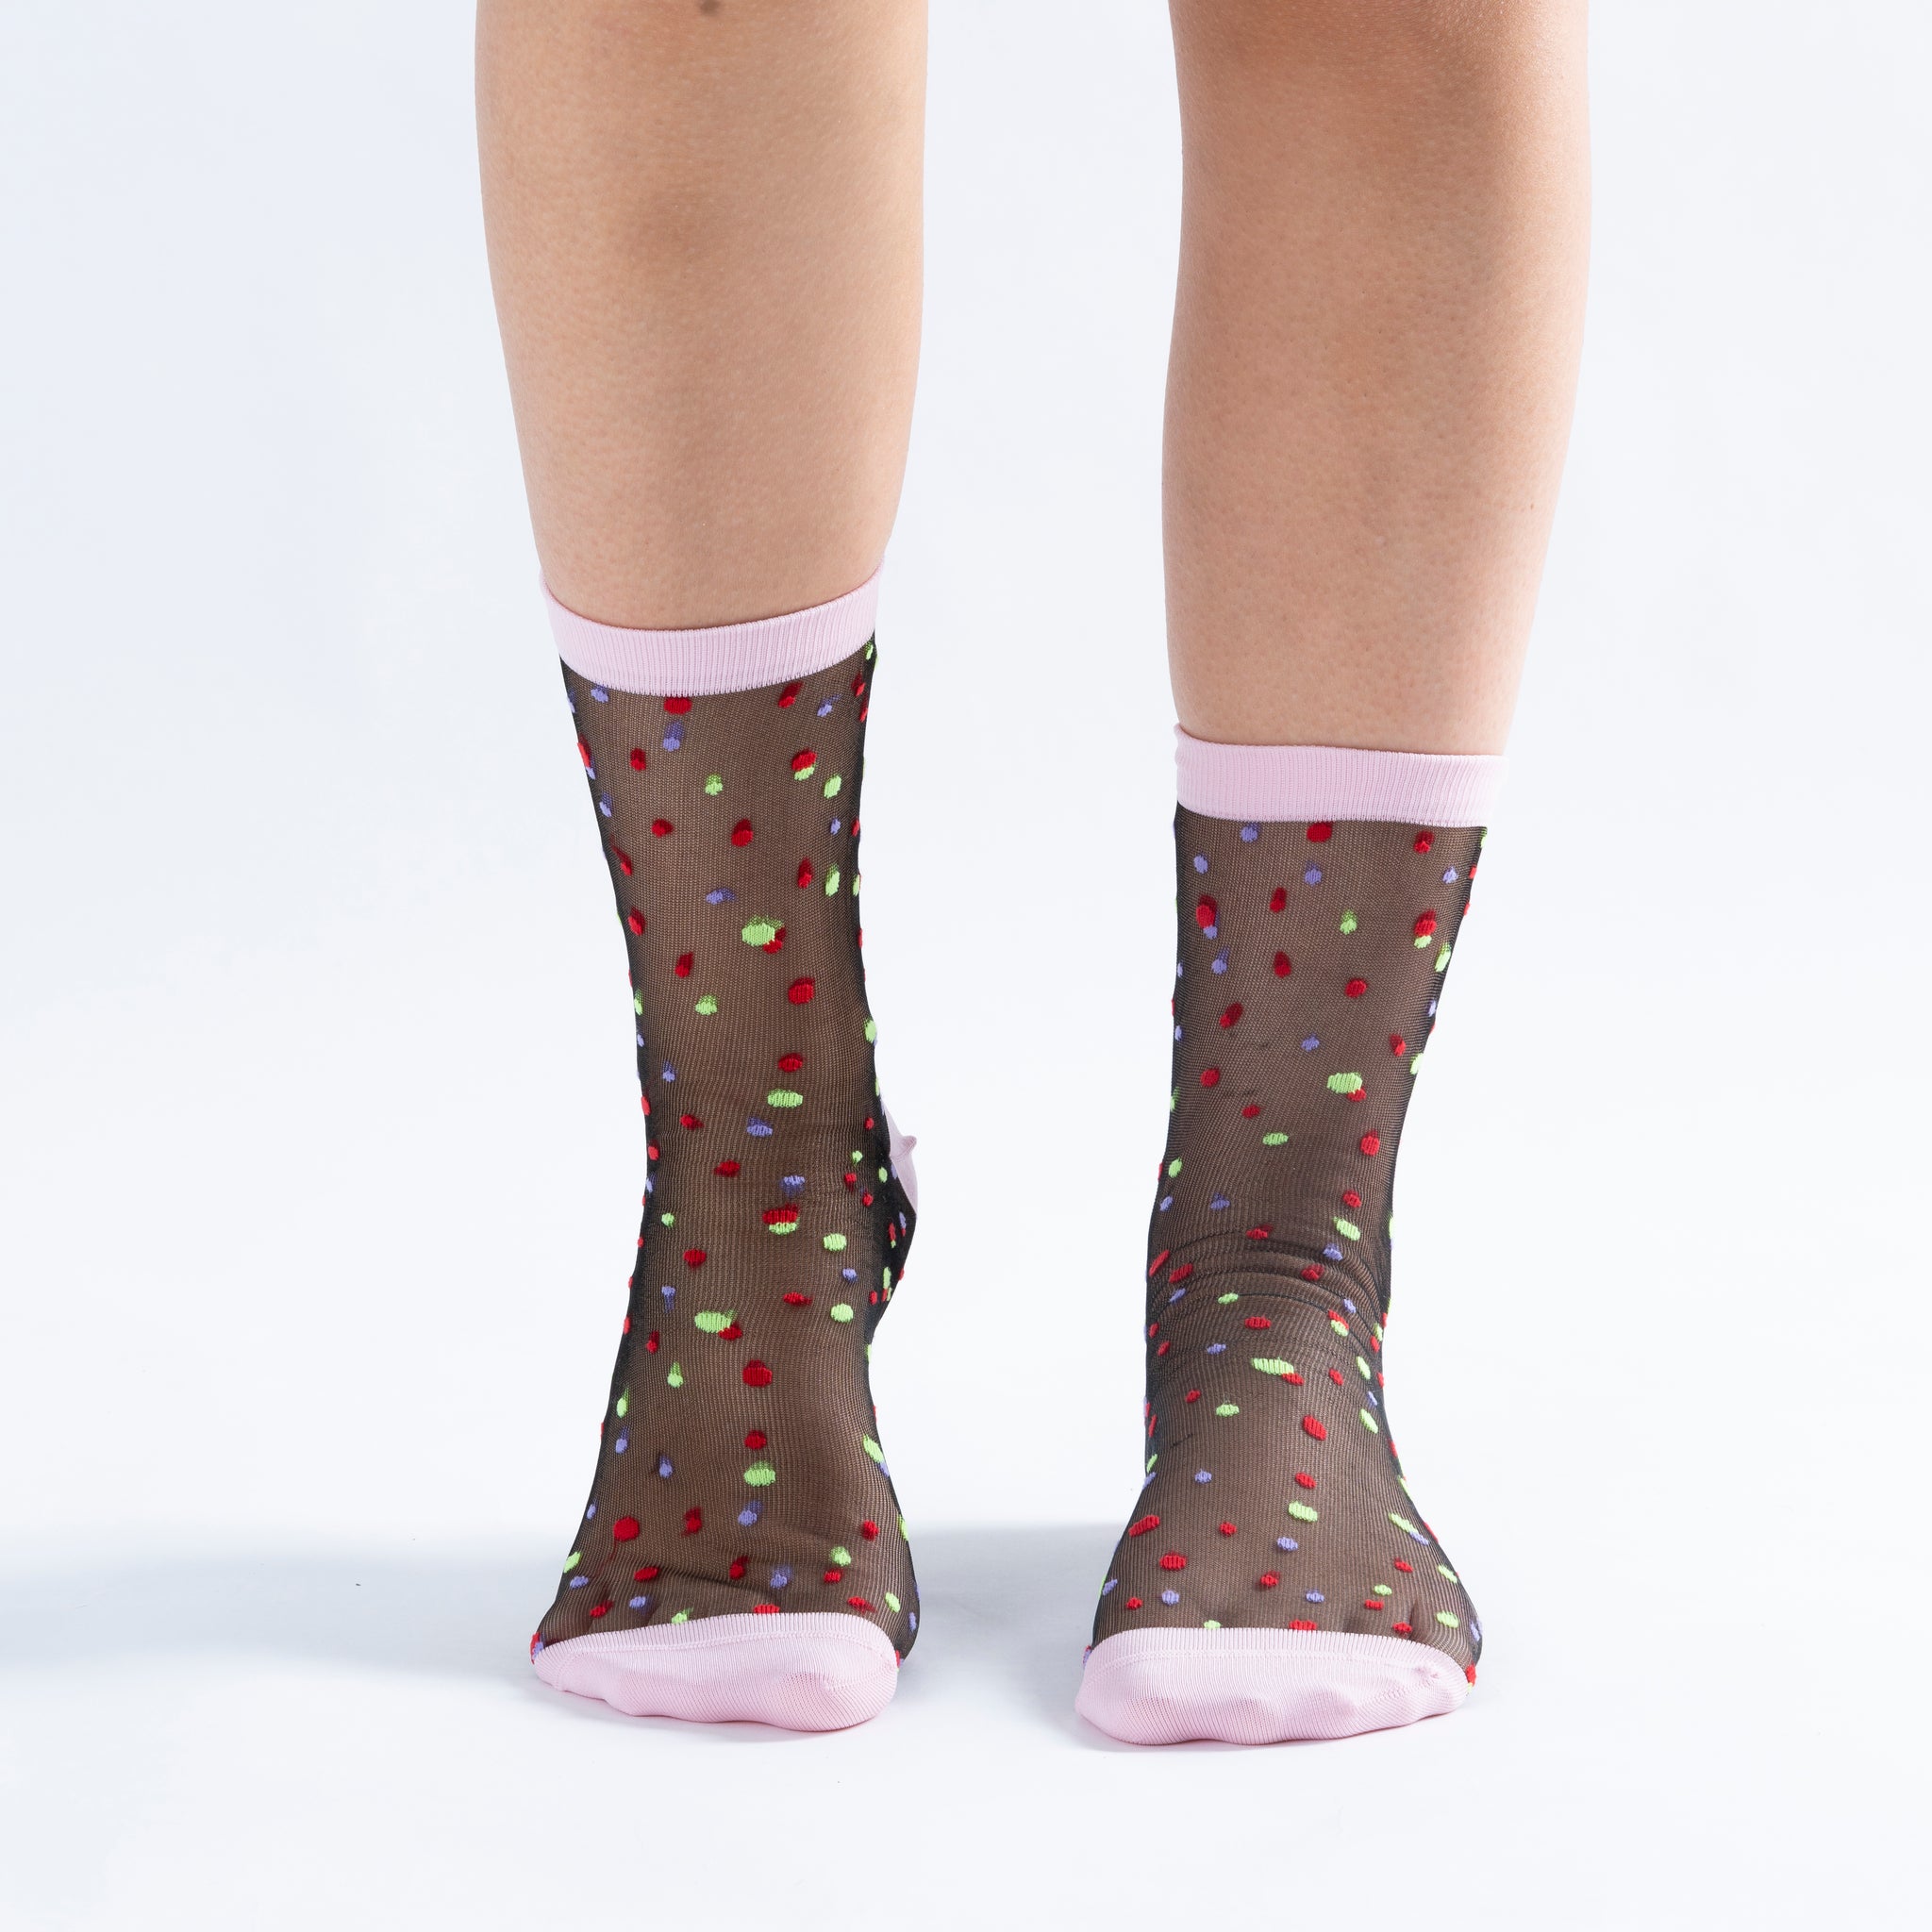 Speckle I High Sock